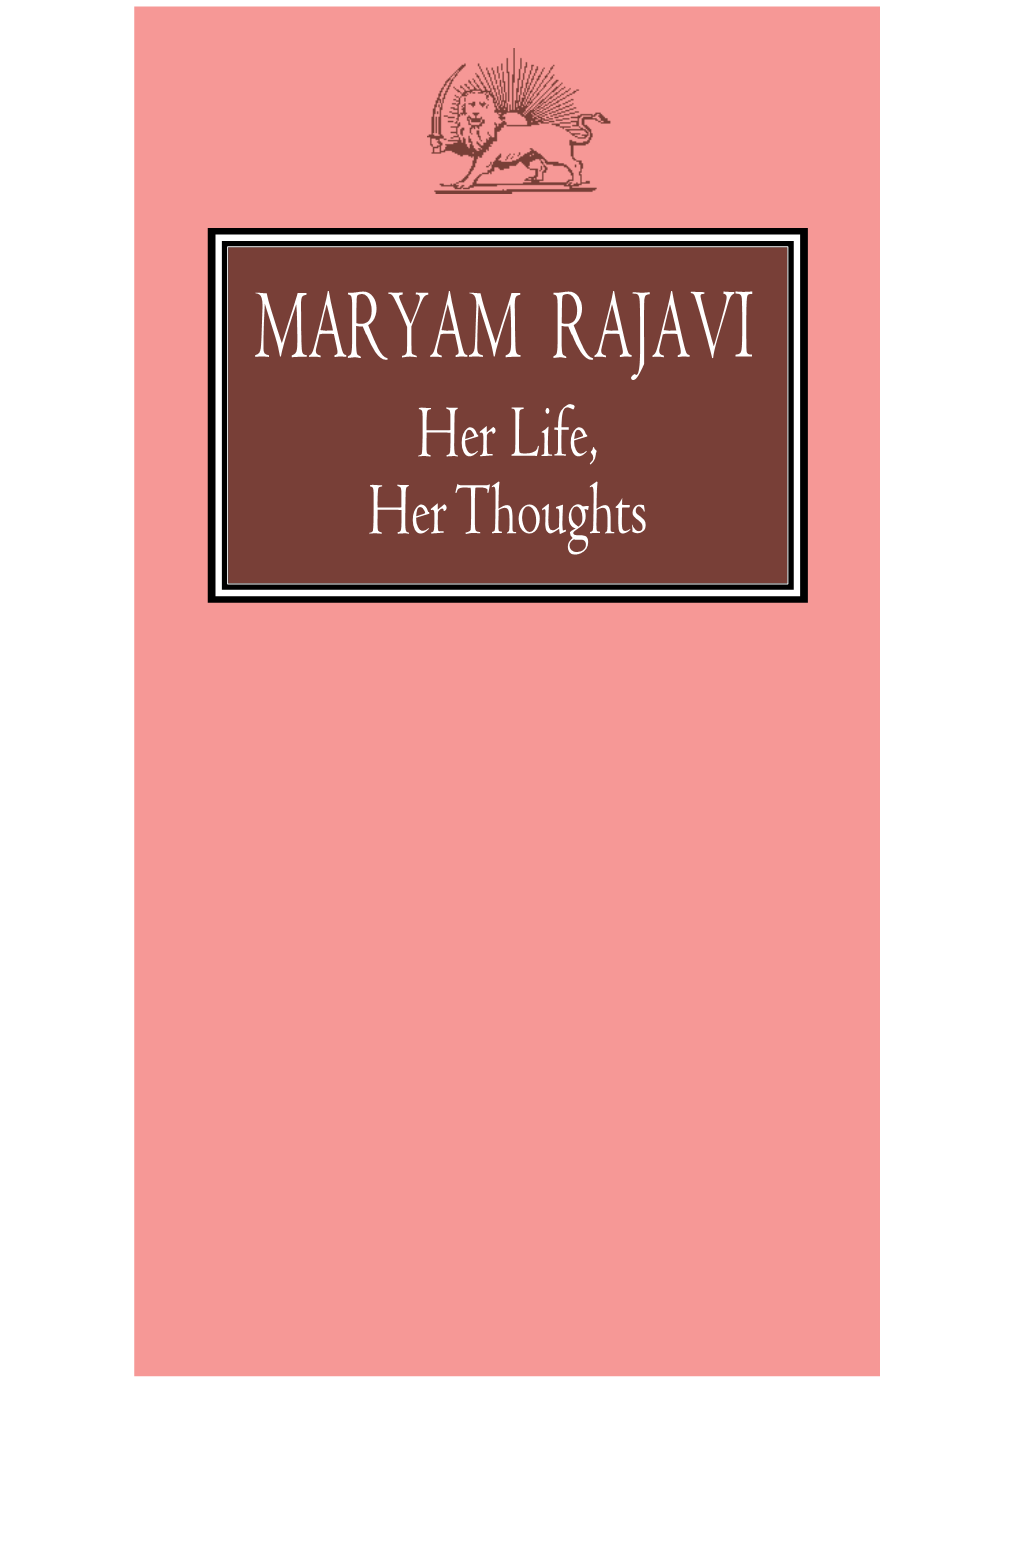 MARYAM RAJAVI Her Life, Her Thoughts Her Life 1 the Beginning Maryam Rajavi Was Born in 1953 to a Middle Class Family in Tehran